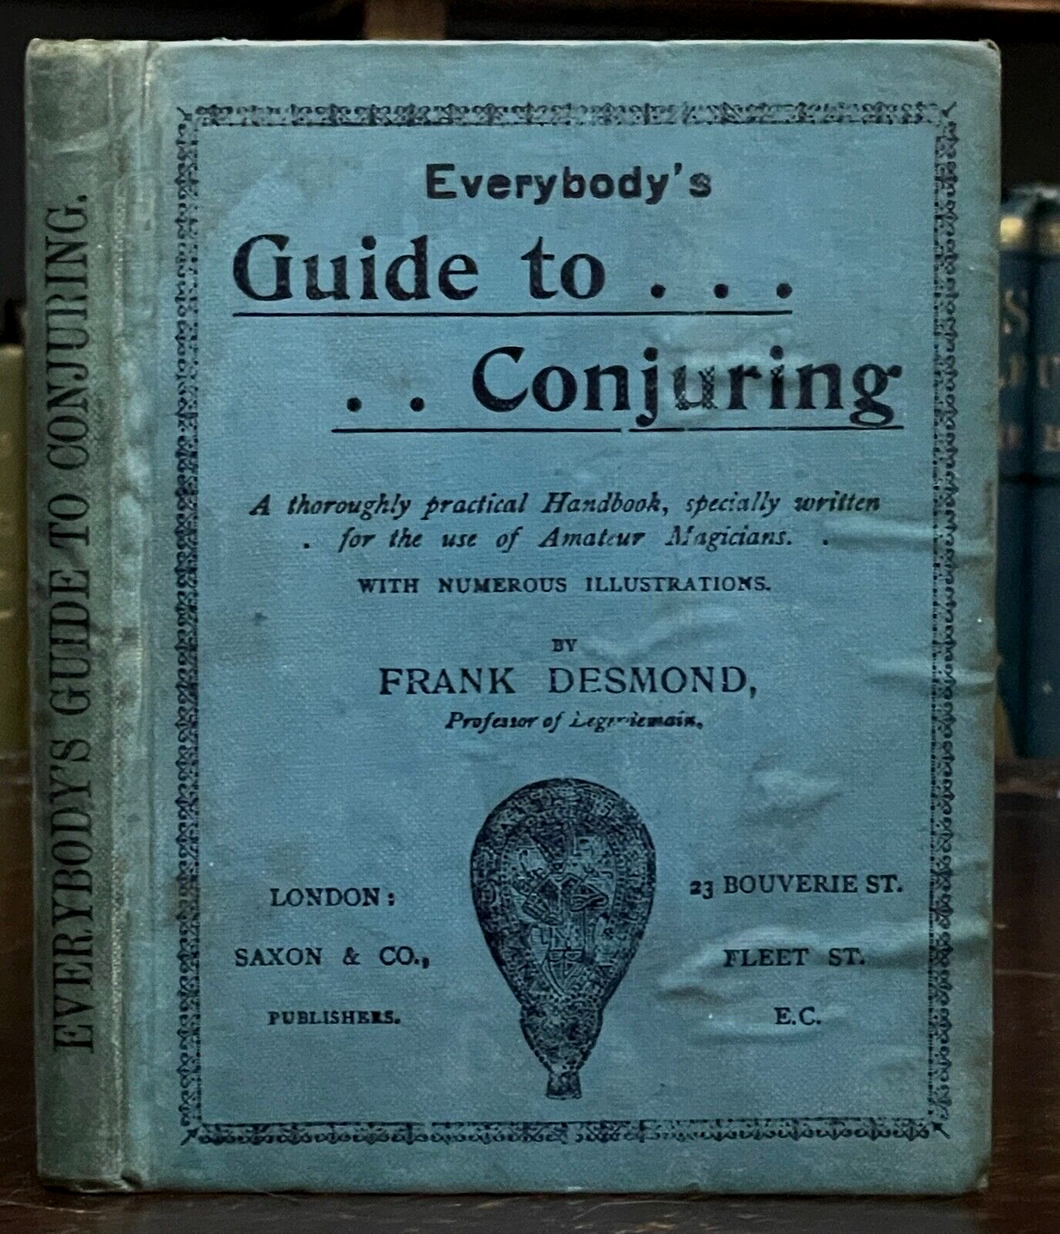 EVERYBODY'S GUIDE TO CONJURING - Desmond, 1899 - MAGIC TRICKS, ENTERTAINMENT